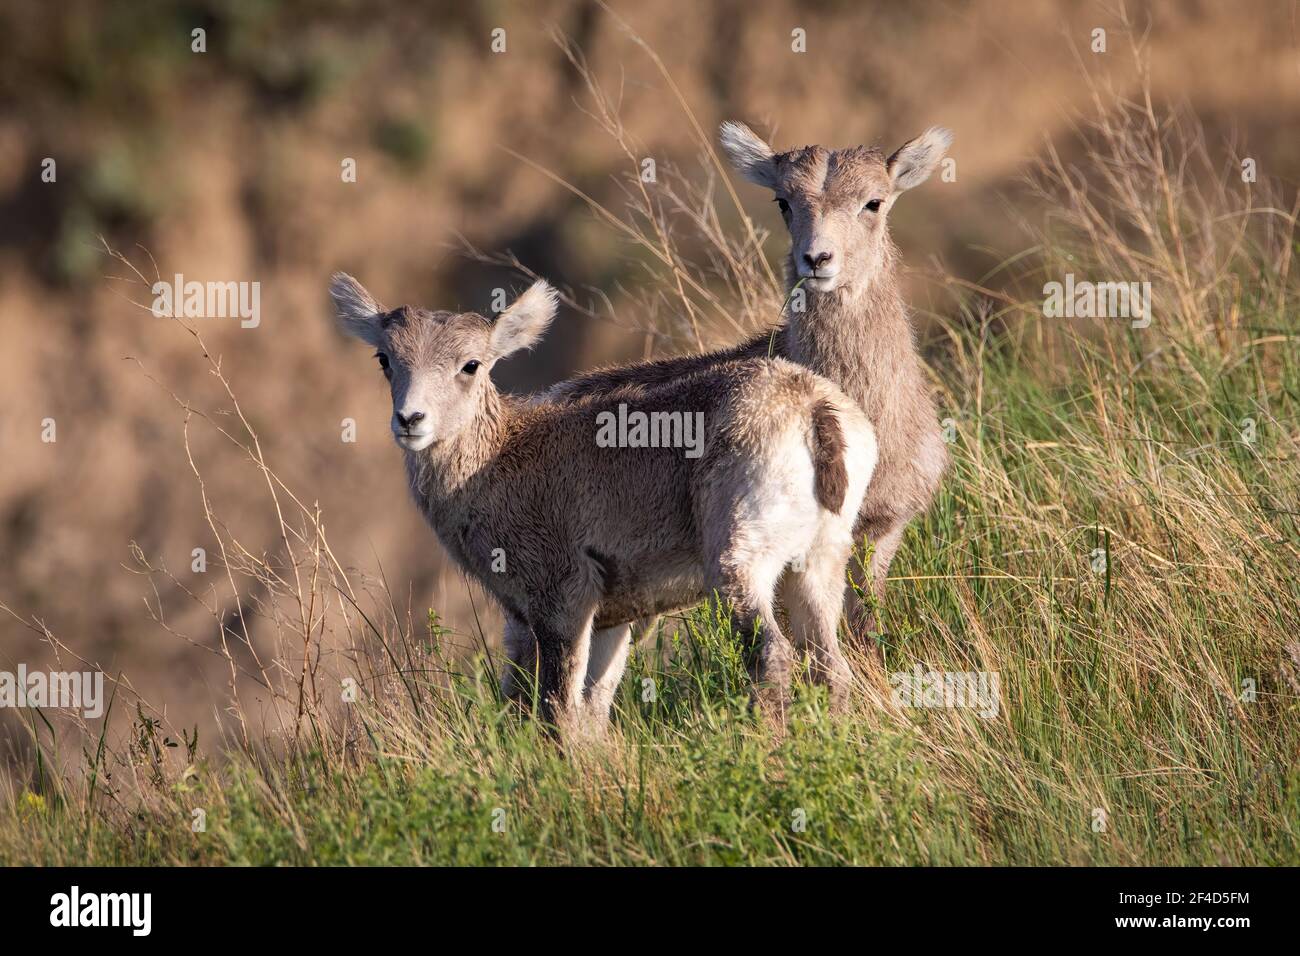 Two baby bighorn sheep standing next to each other looking forward and one sheep has a piece of grass in its mouth. Stock Photo